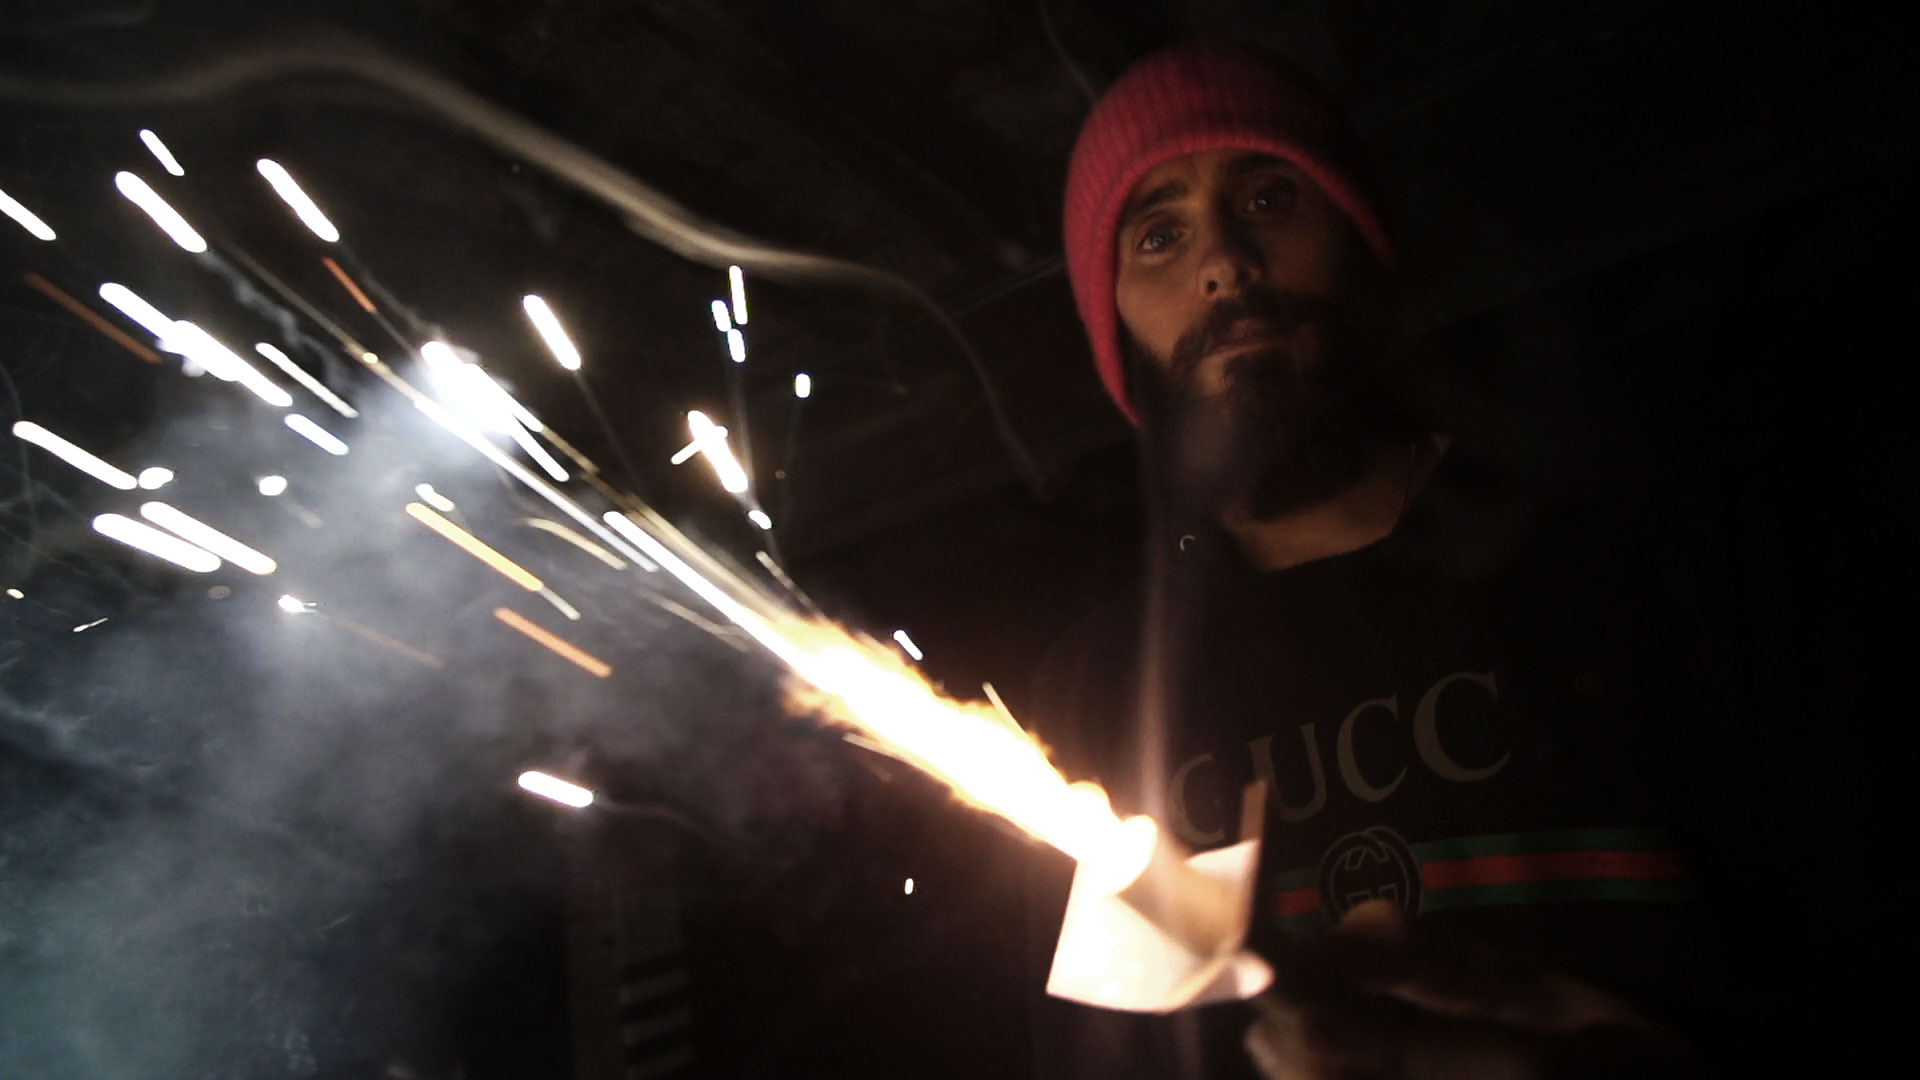 Jared Leto working on his film carrying a blow torch